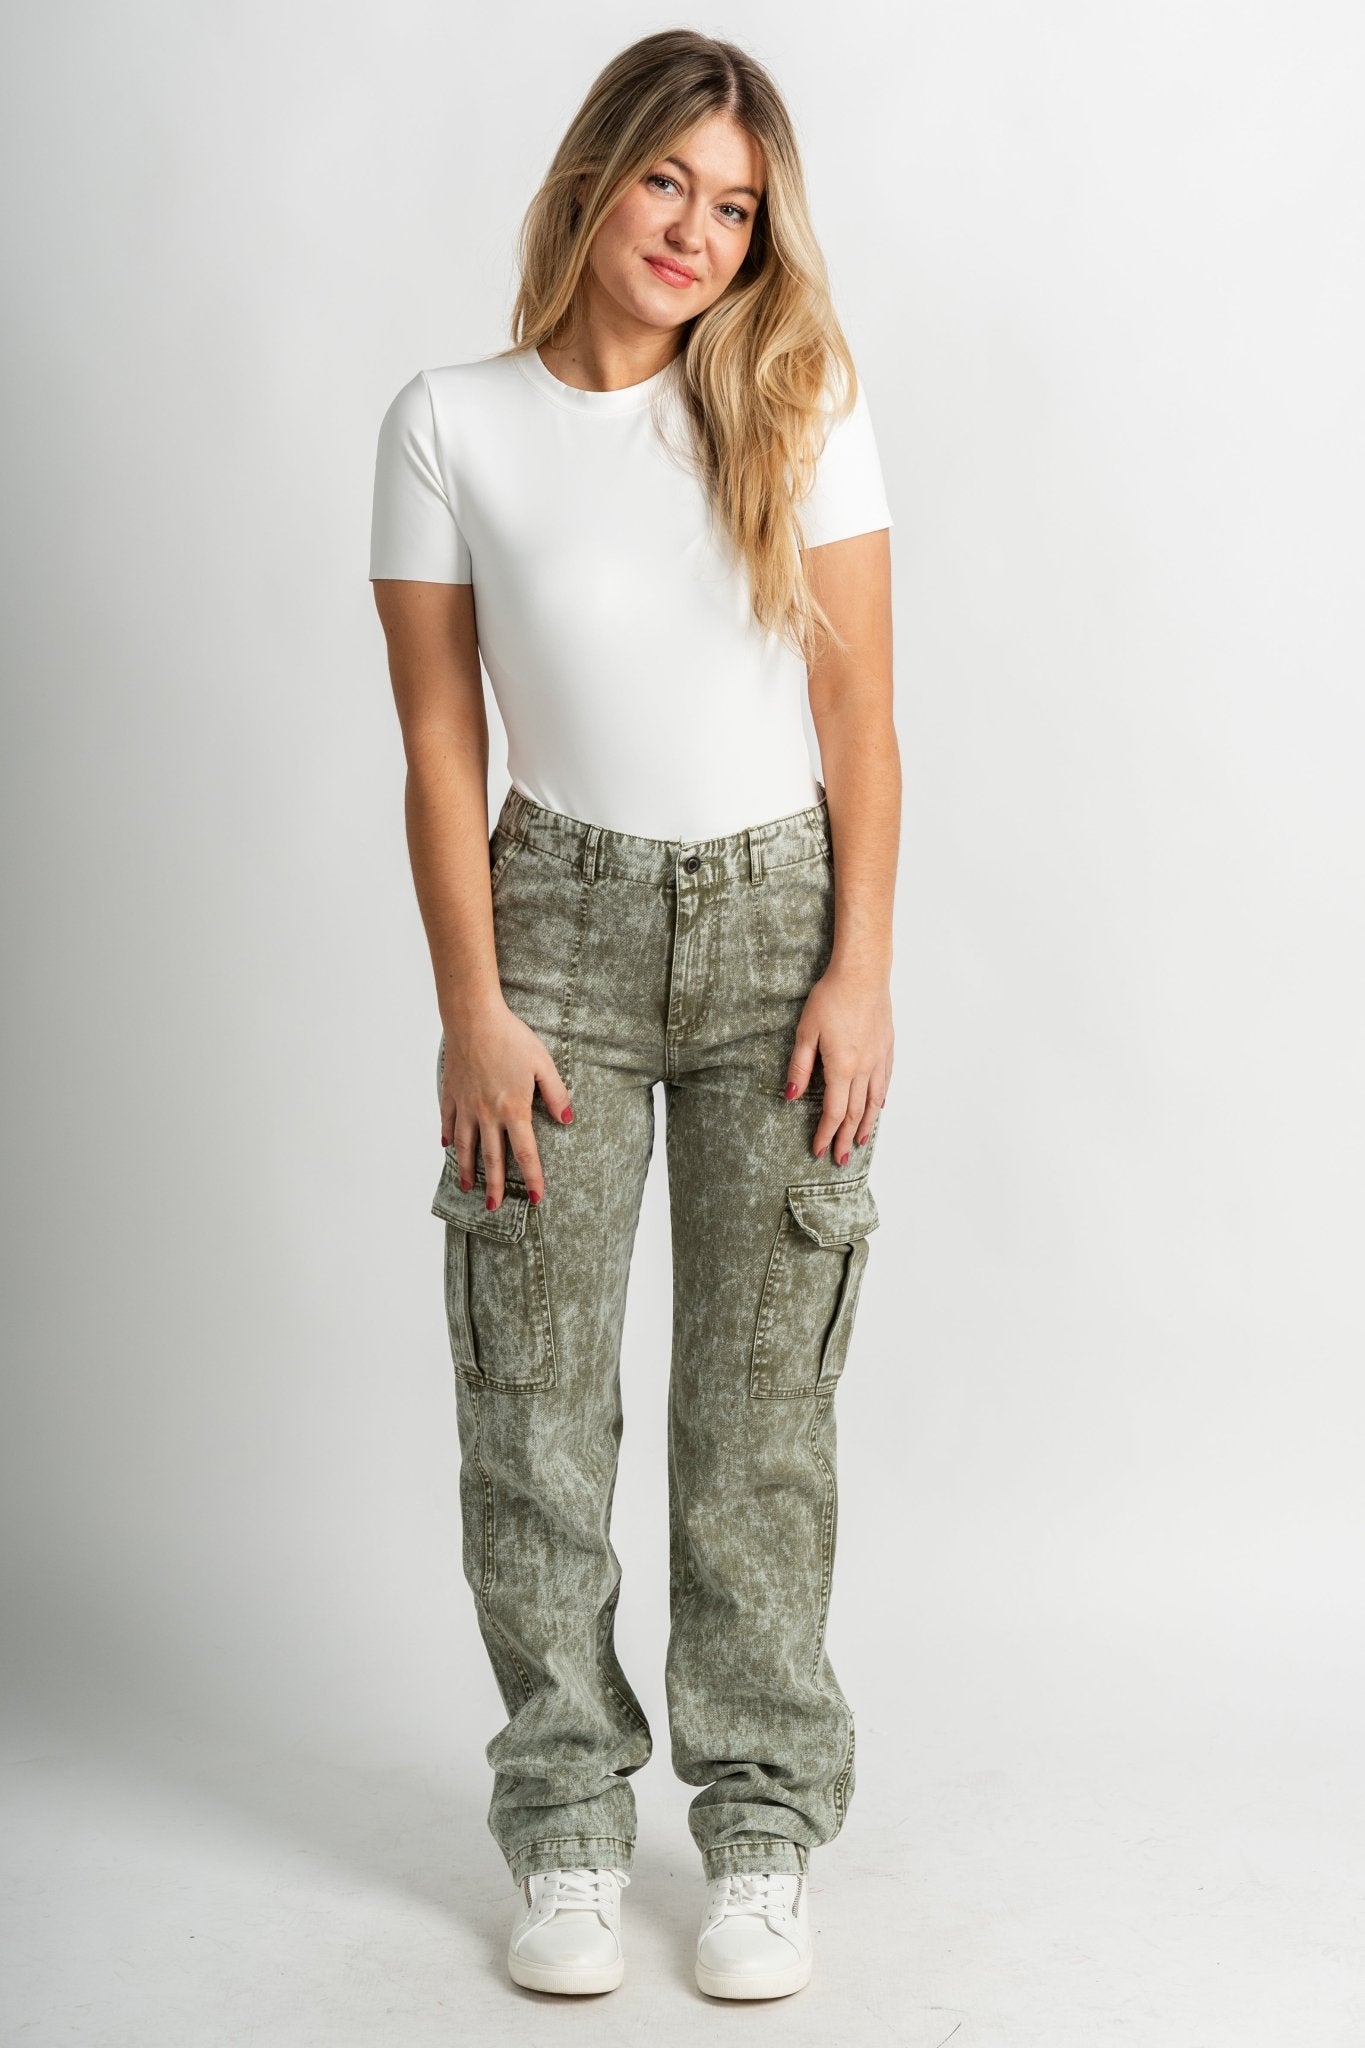 The Best Jeans Under $100 From Our Fave Brands - The Mom Edit